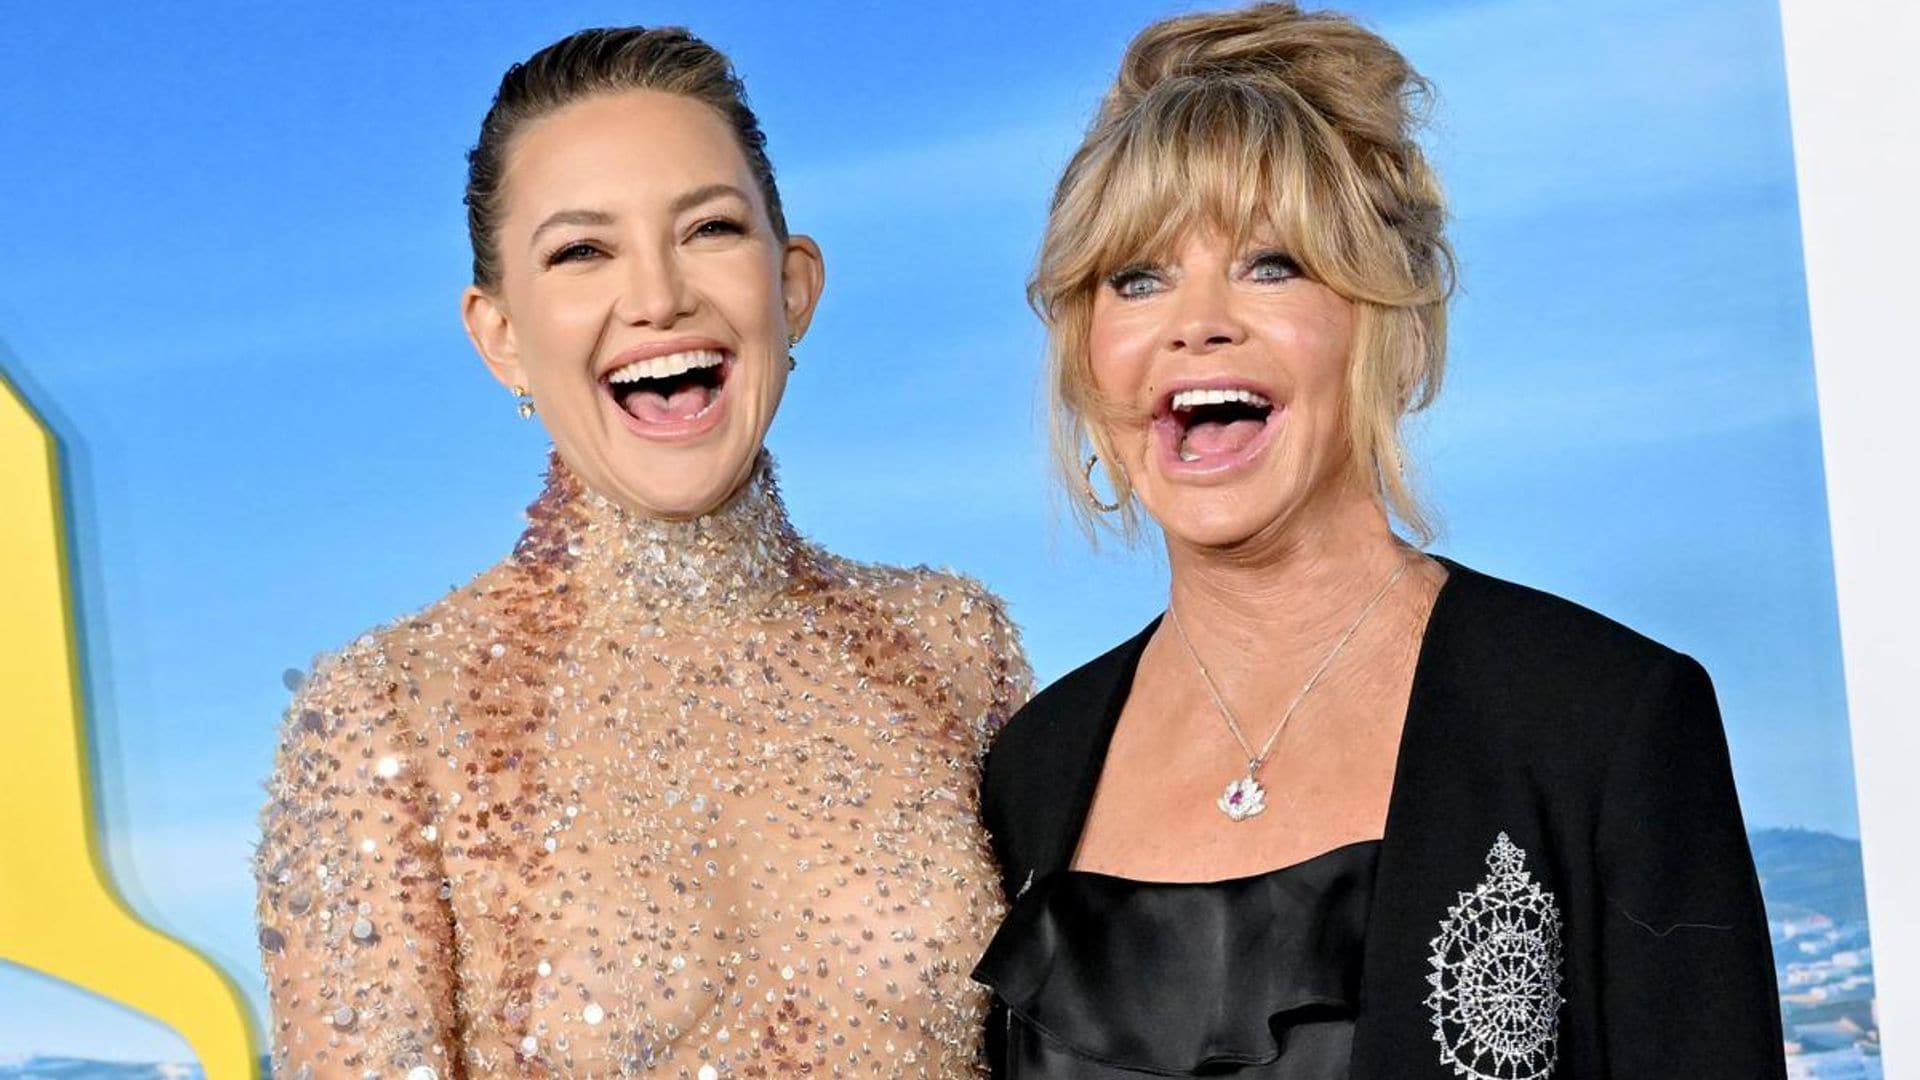 Kate Hudson says she and her mom Goldie Hawn can see ghosts